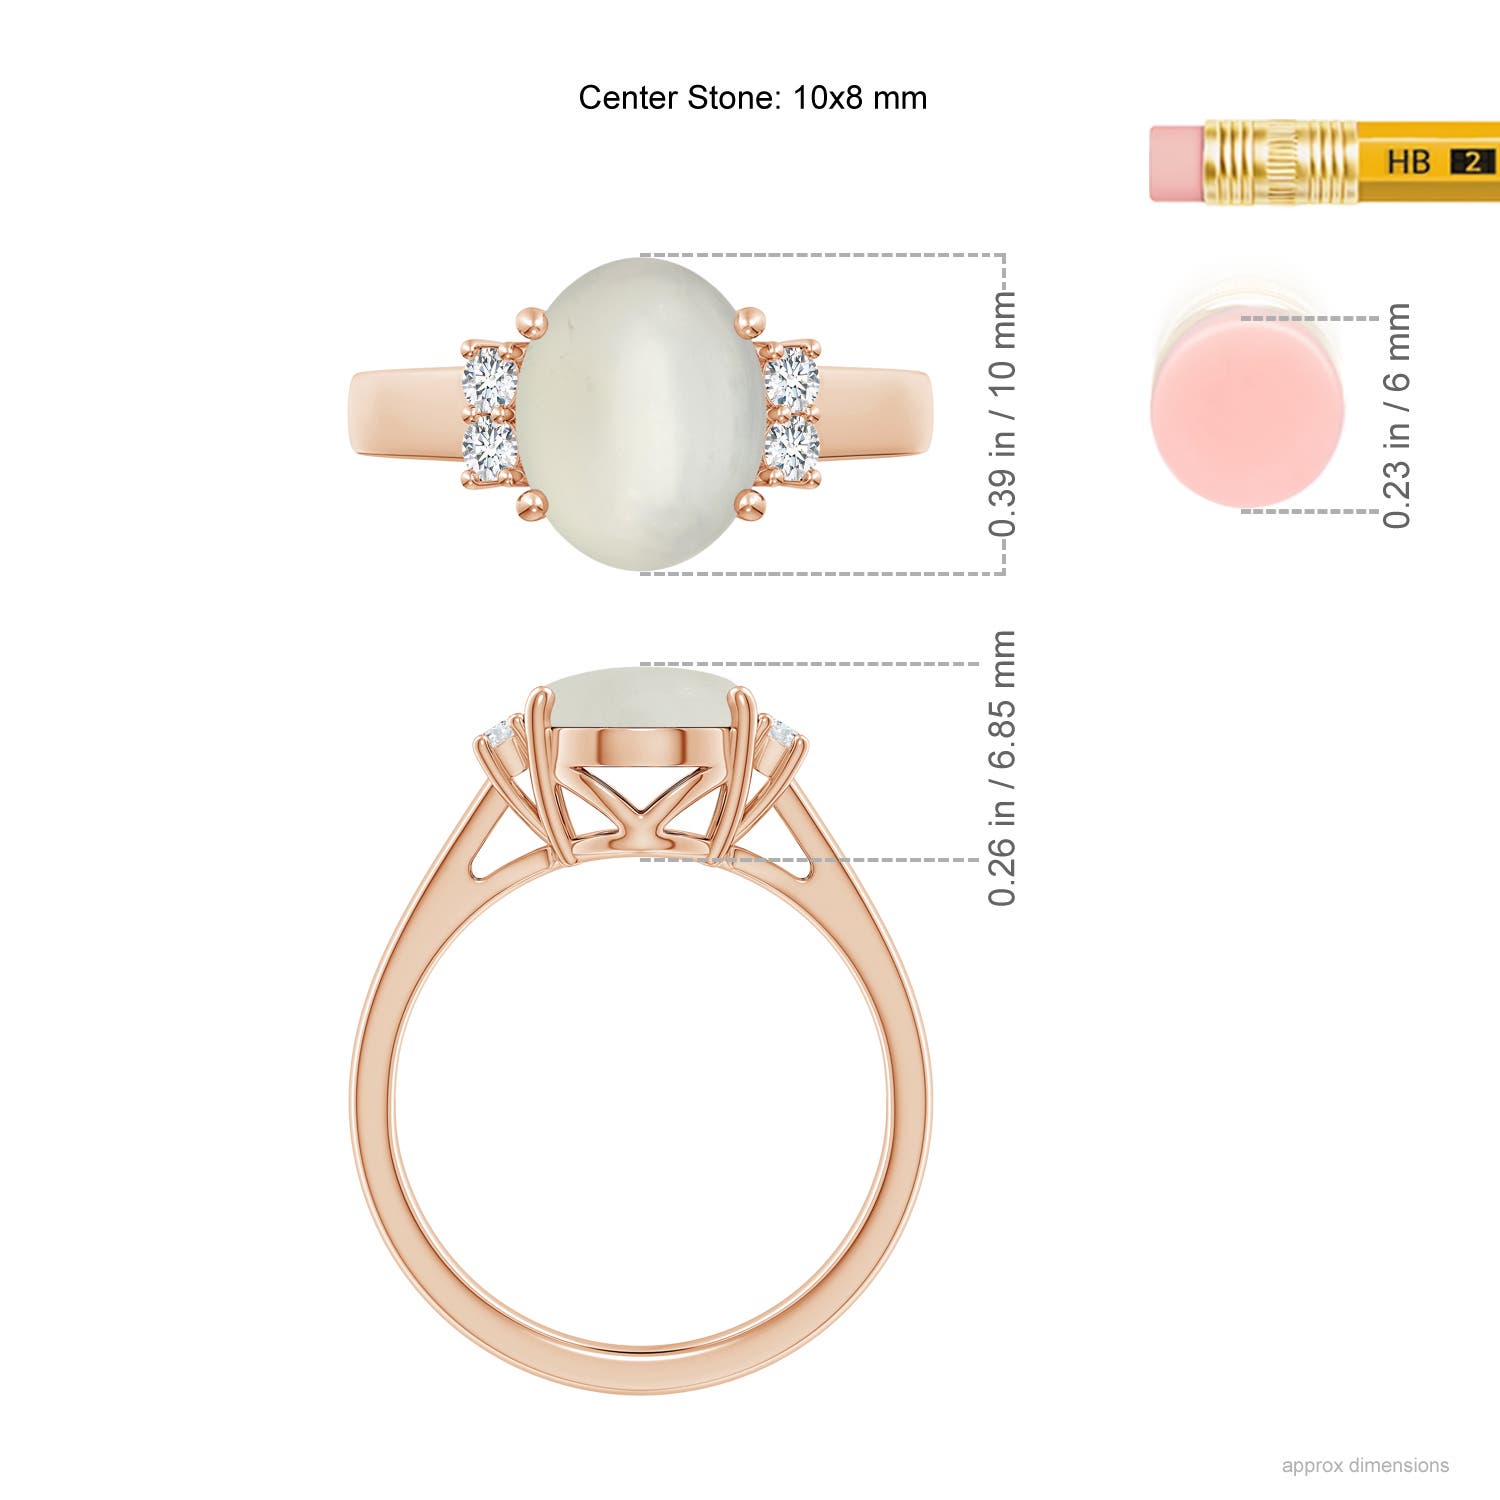 AAA - Moonstone / 2.66 CT / 14 KT Rose Gold